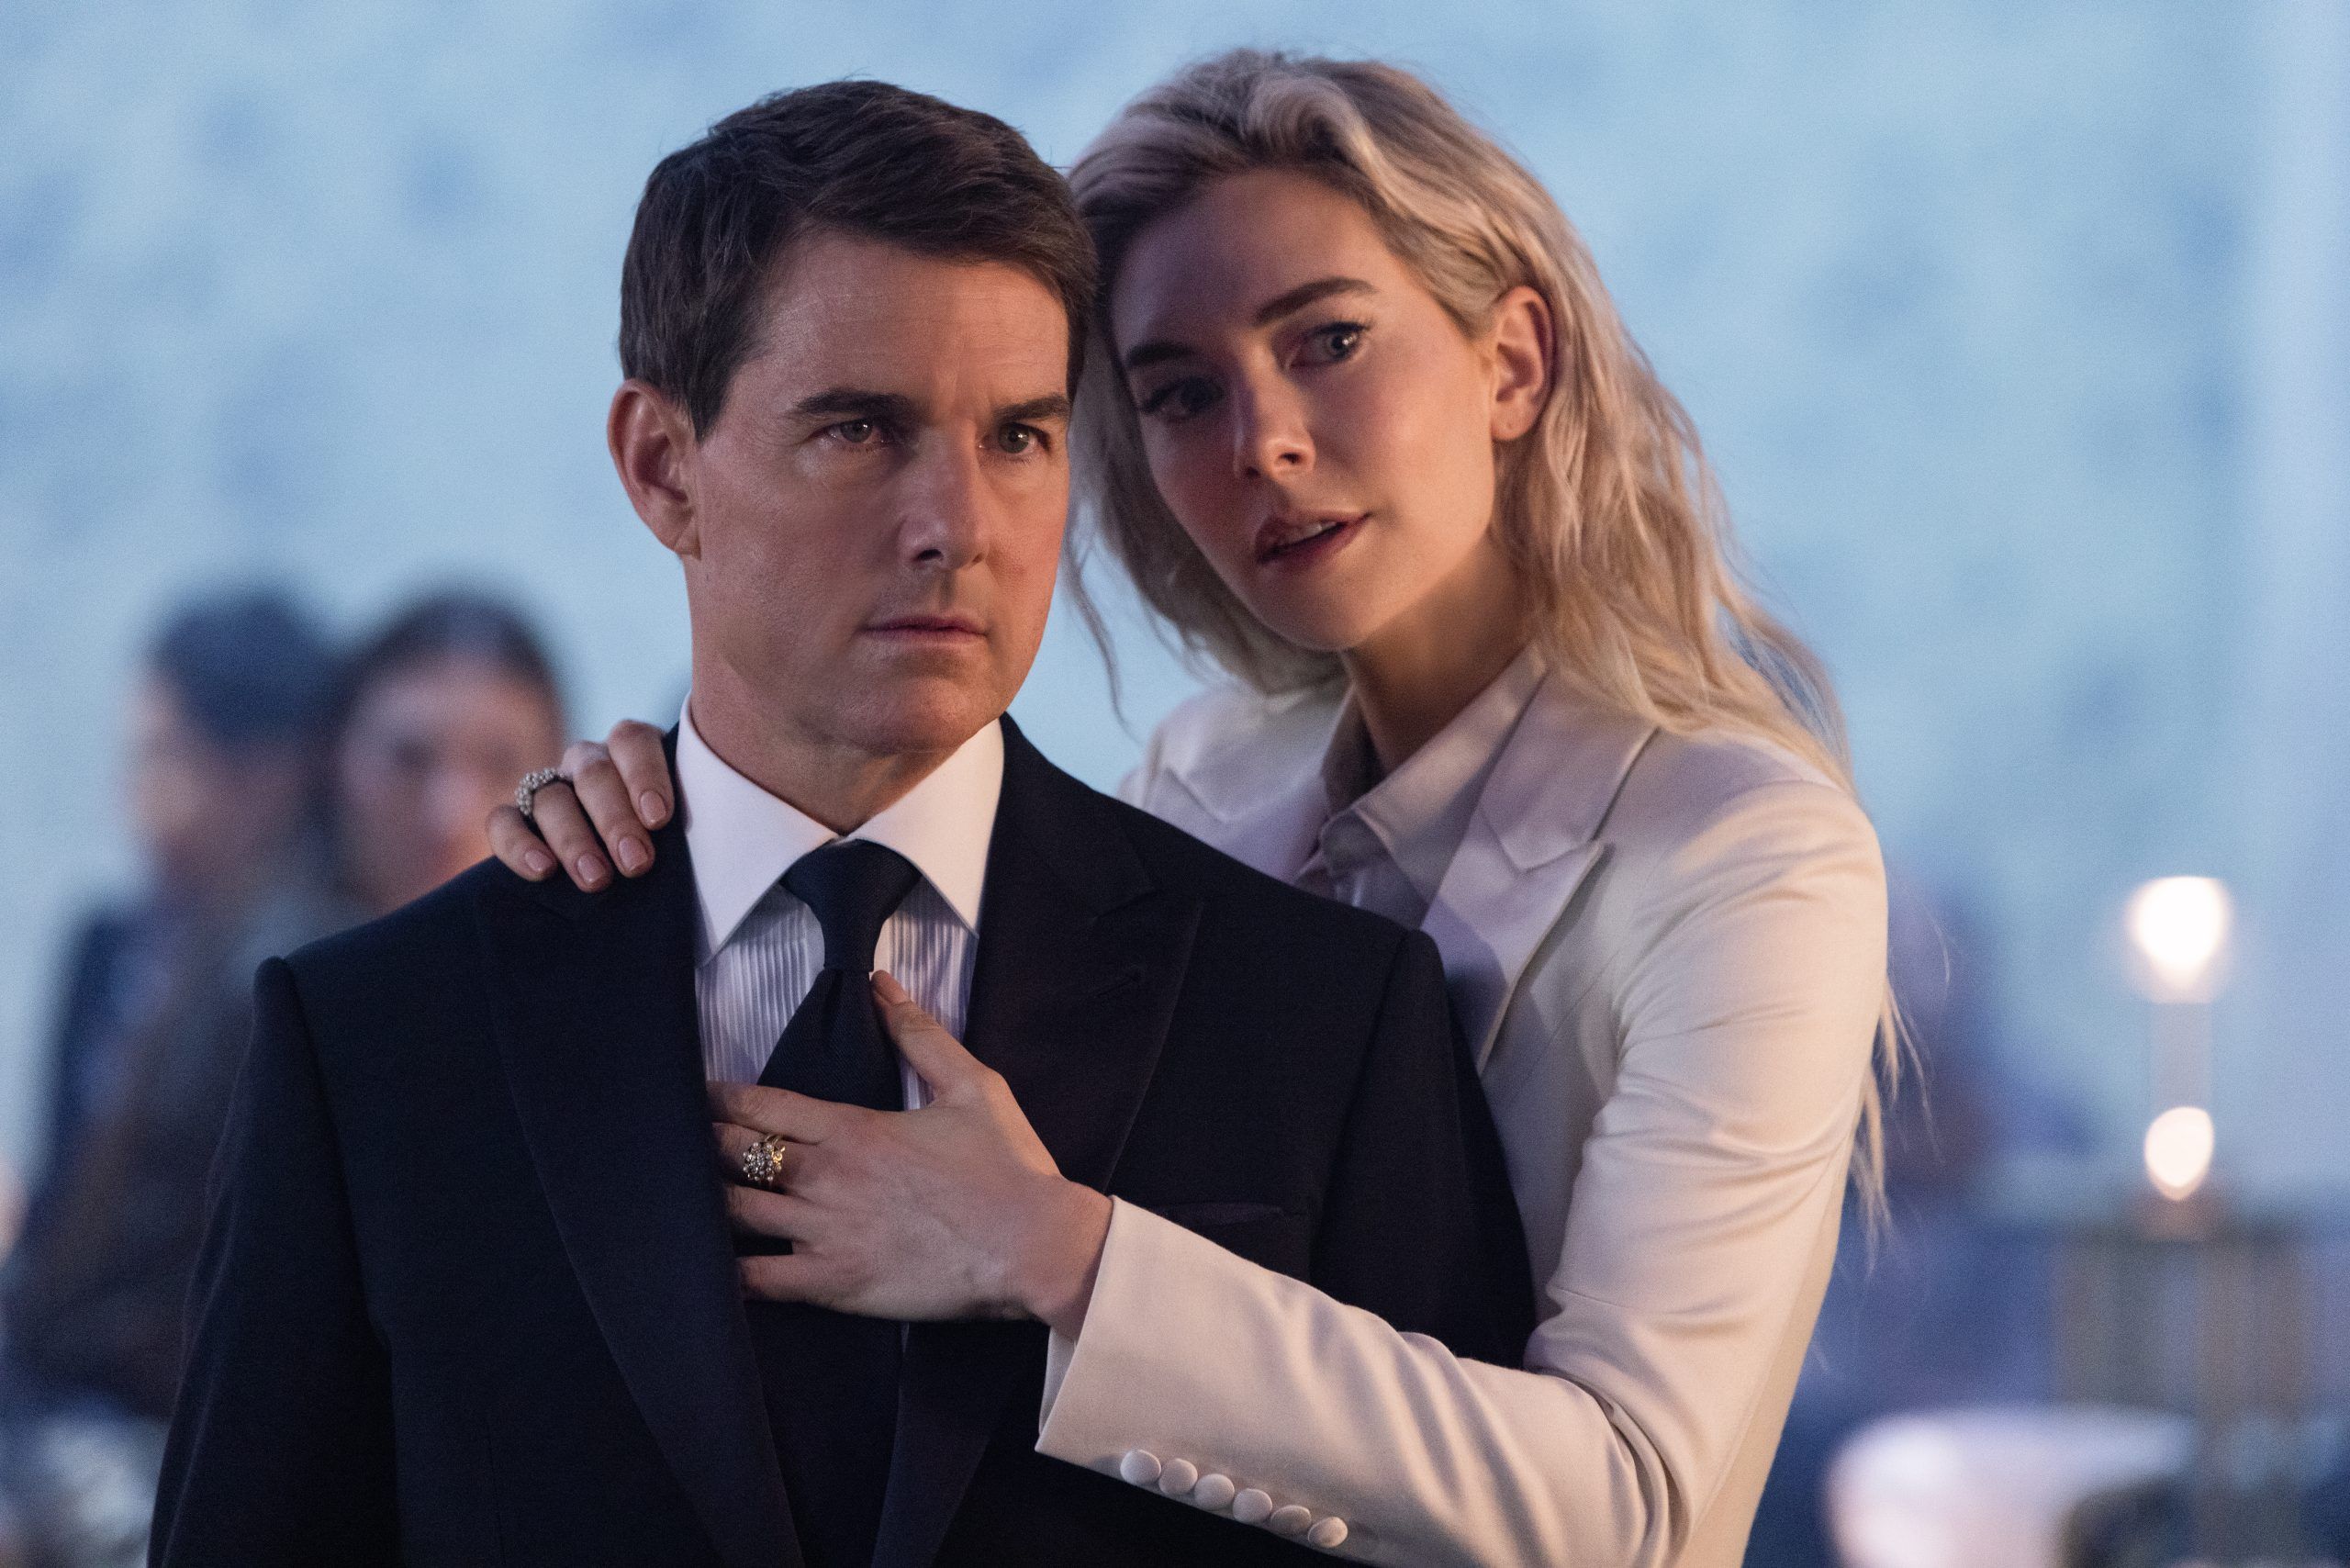 Mission Impossible: Dead Reckoning Part 1' Box Office Total